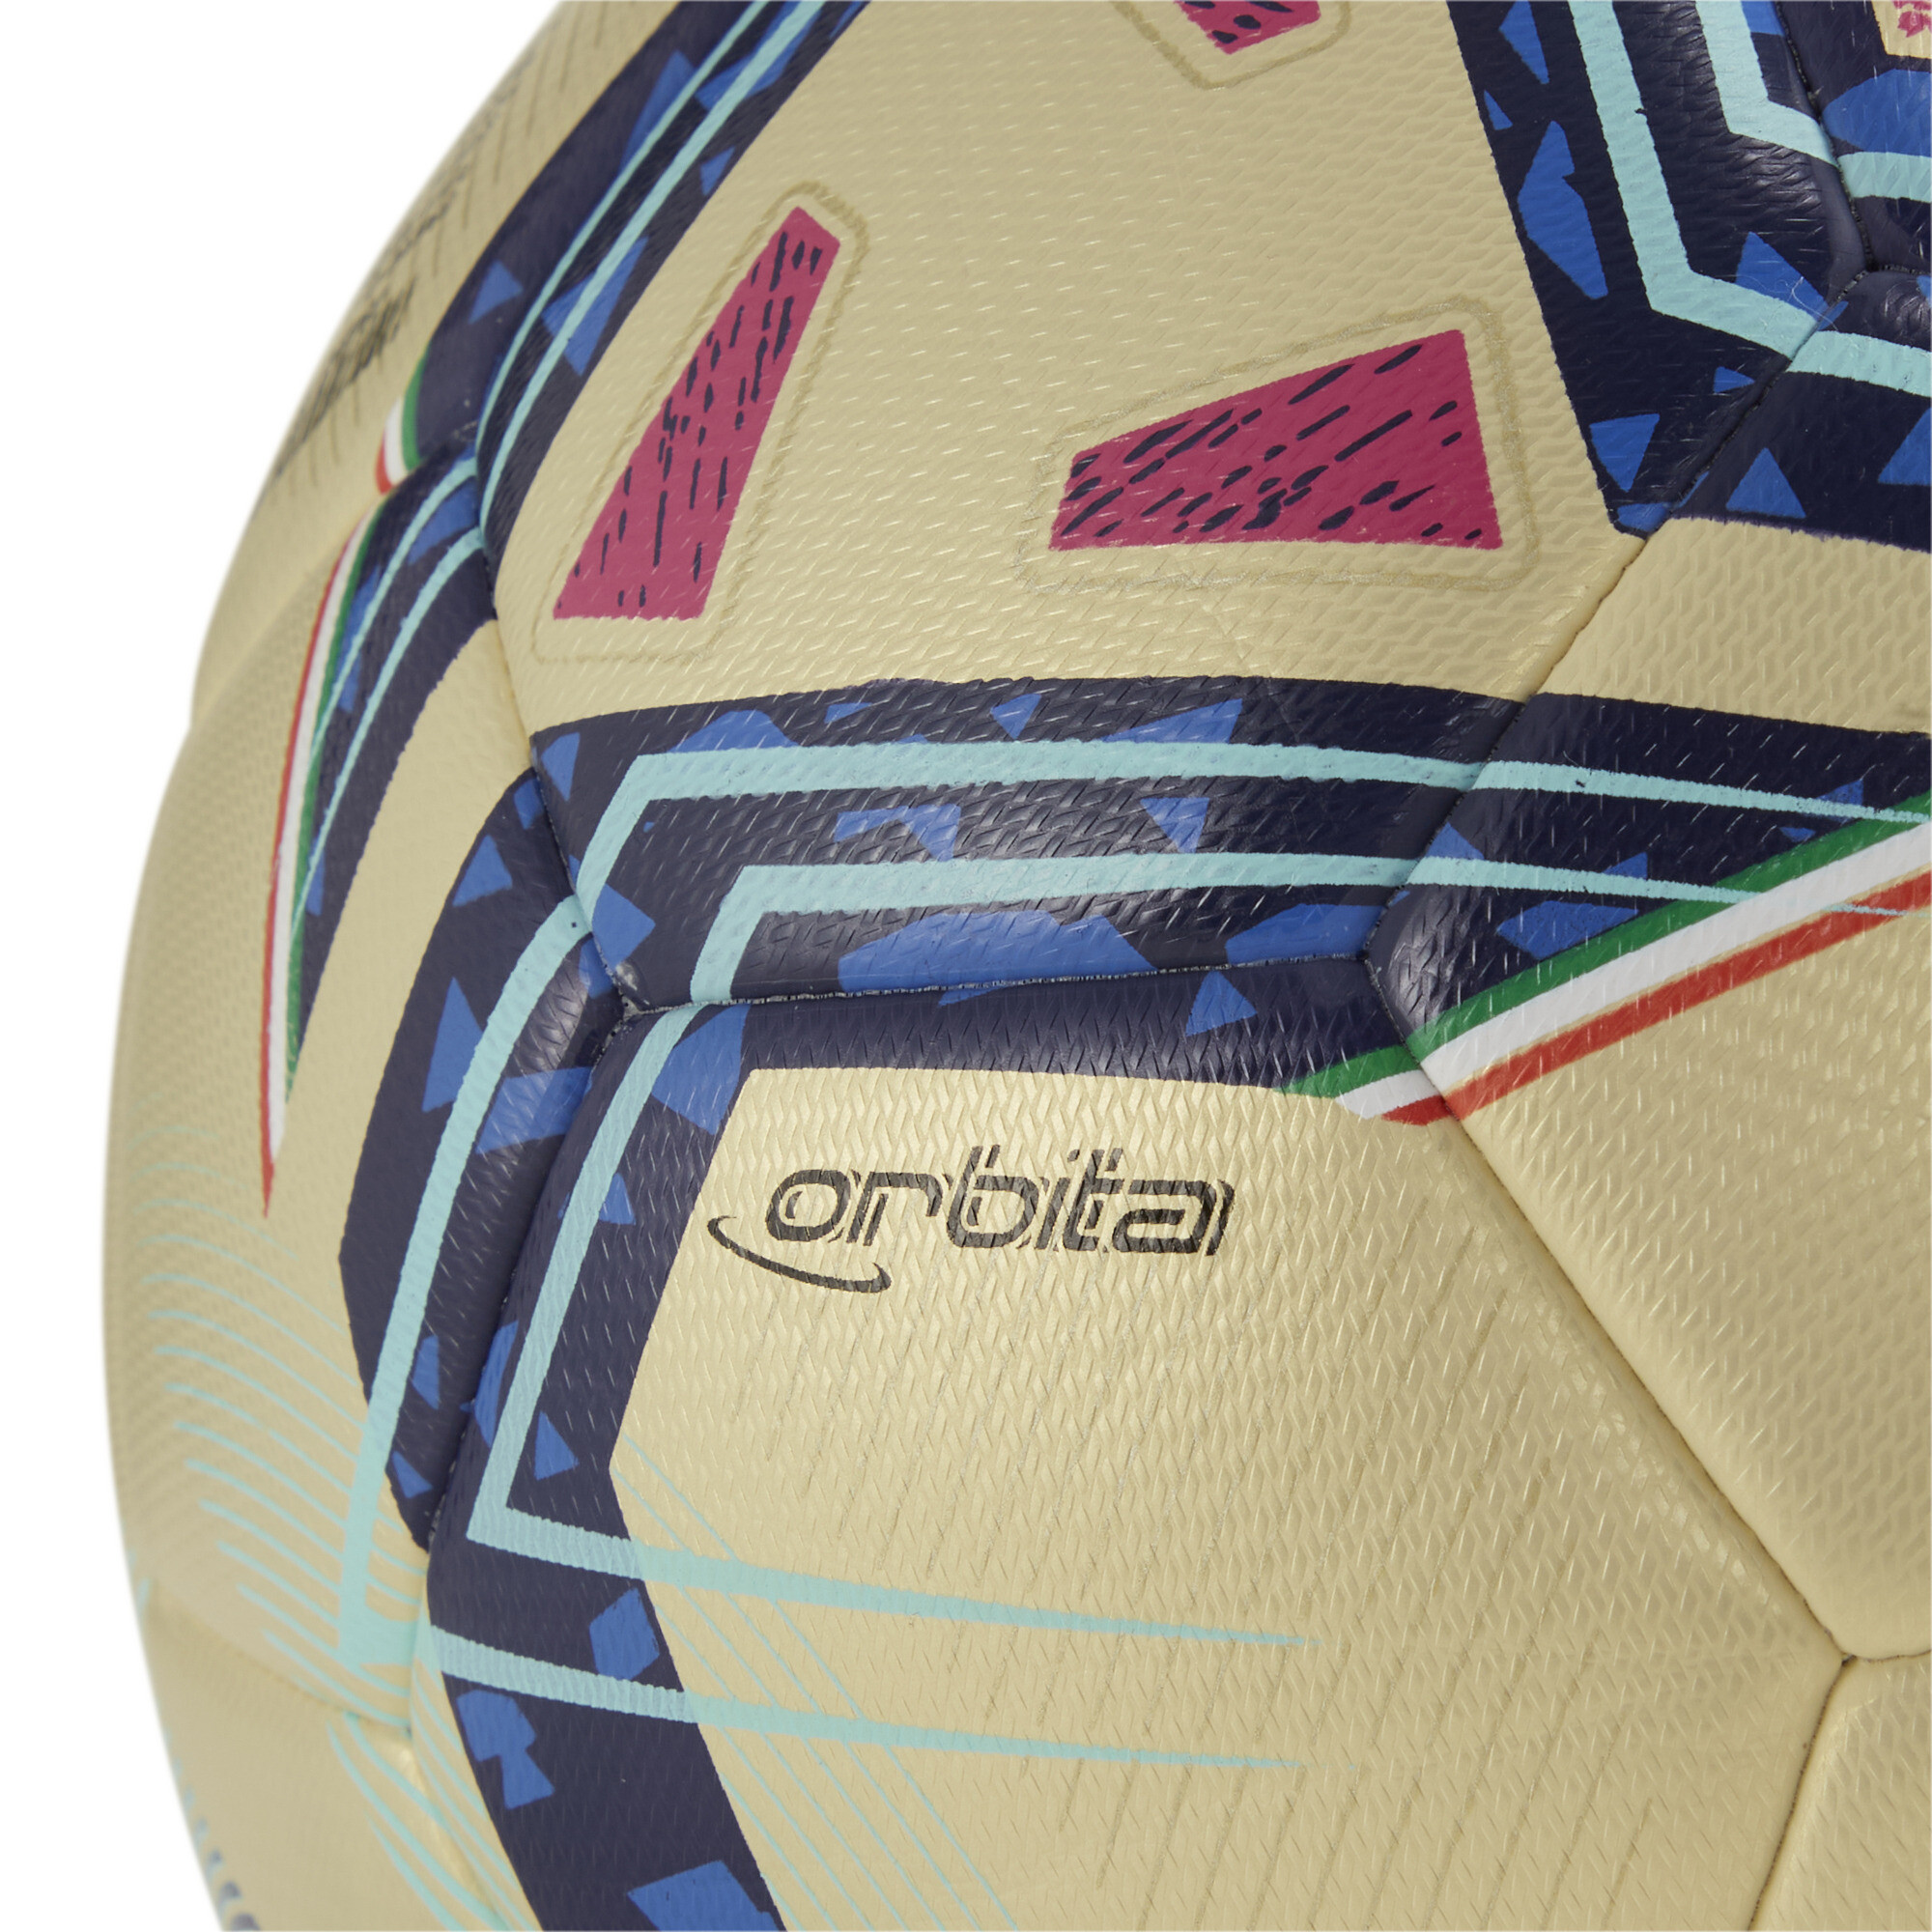 Puma Serie A Special Edition Hybrid Training Football, Gold, Size 3, Accessories